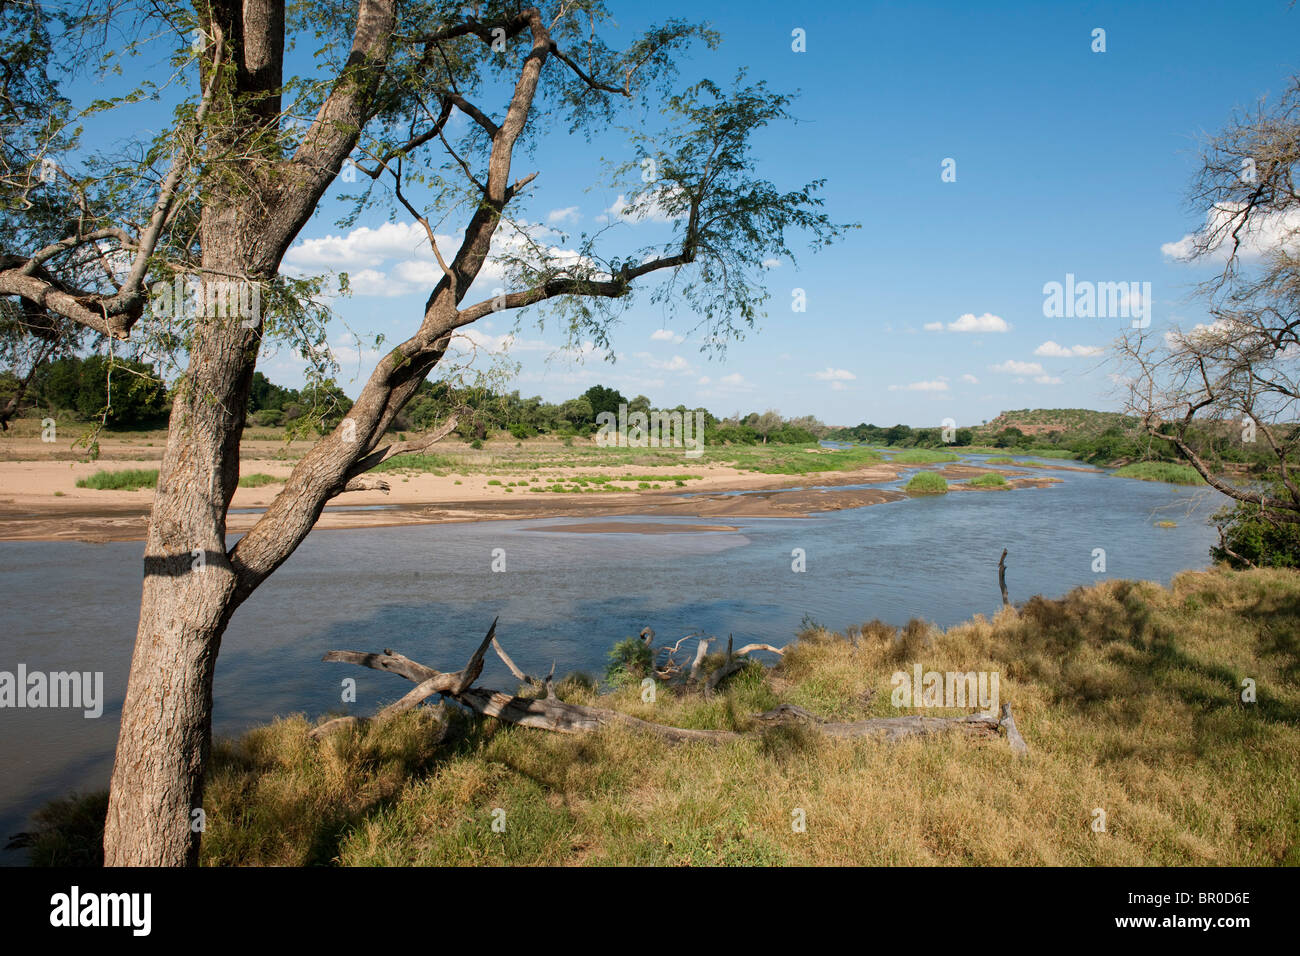 Limpopo river, Mapungubwe National Park, South Africa Stock Photo